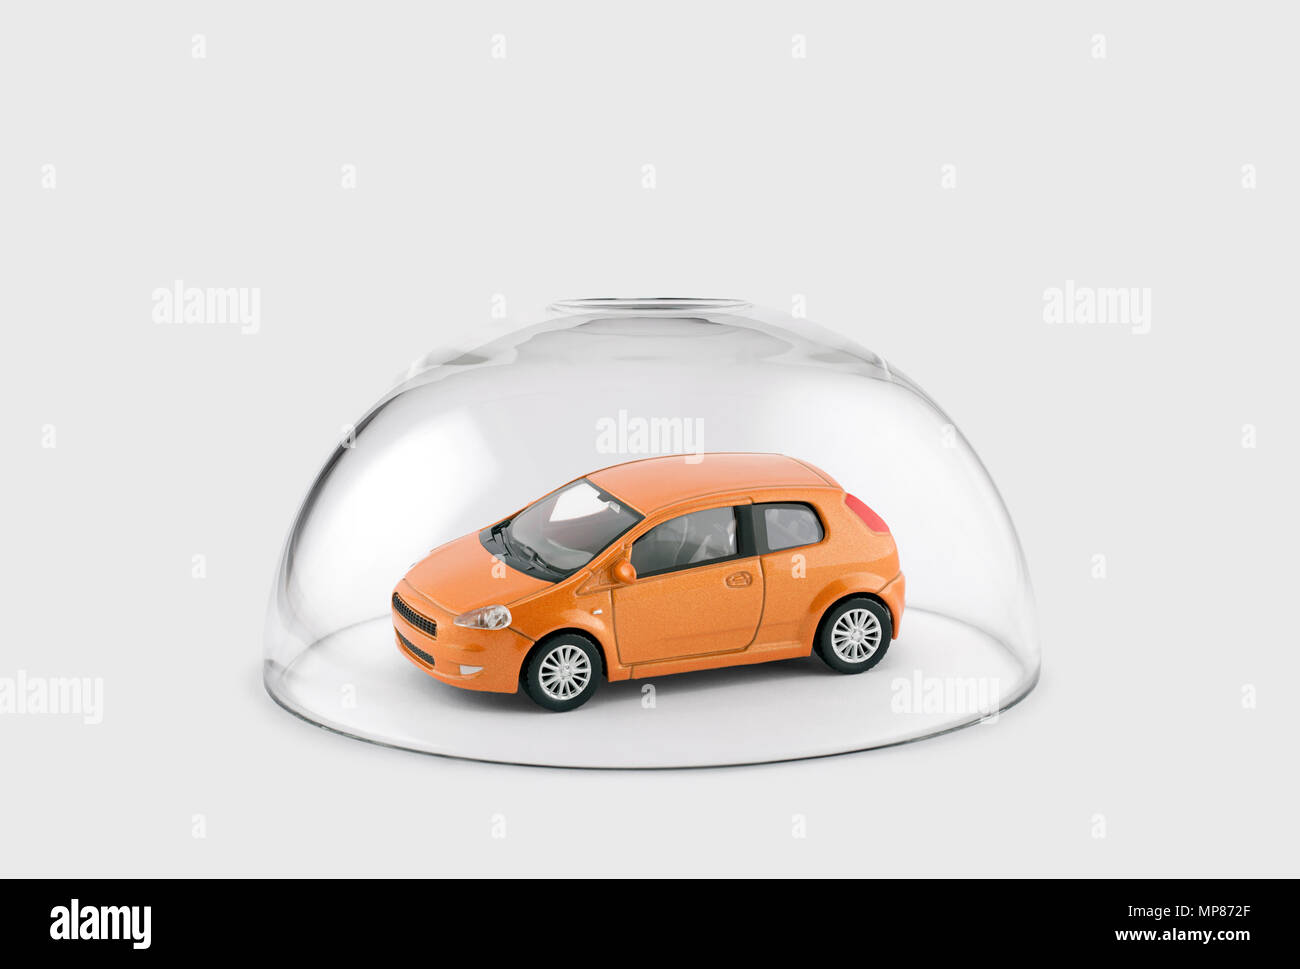 Orange car protected under a glass dome Stock Photo